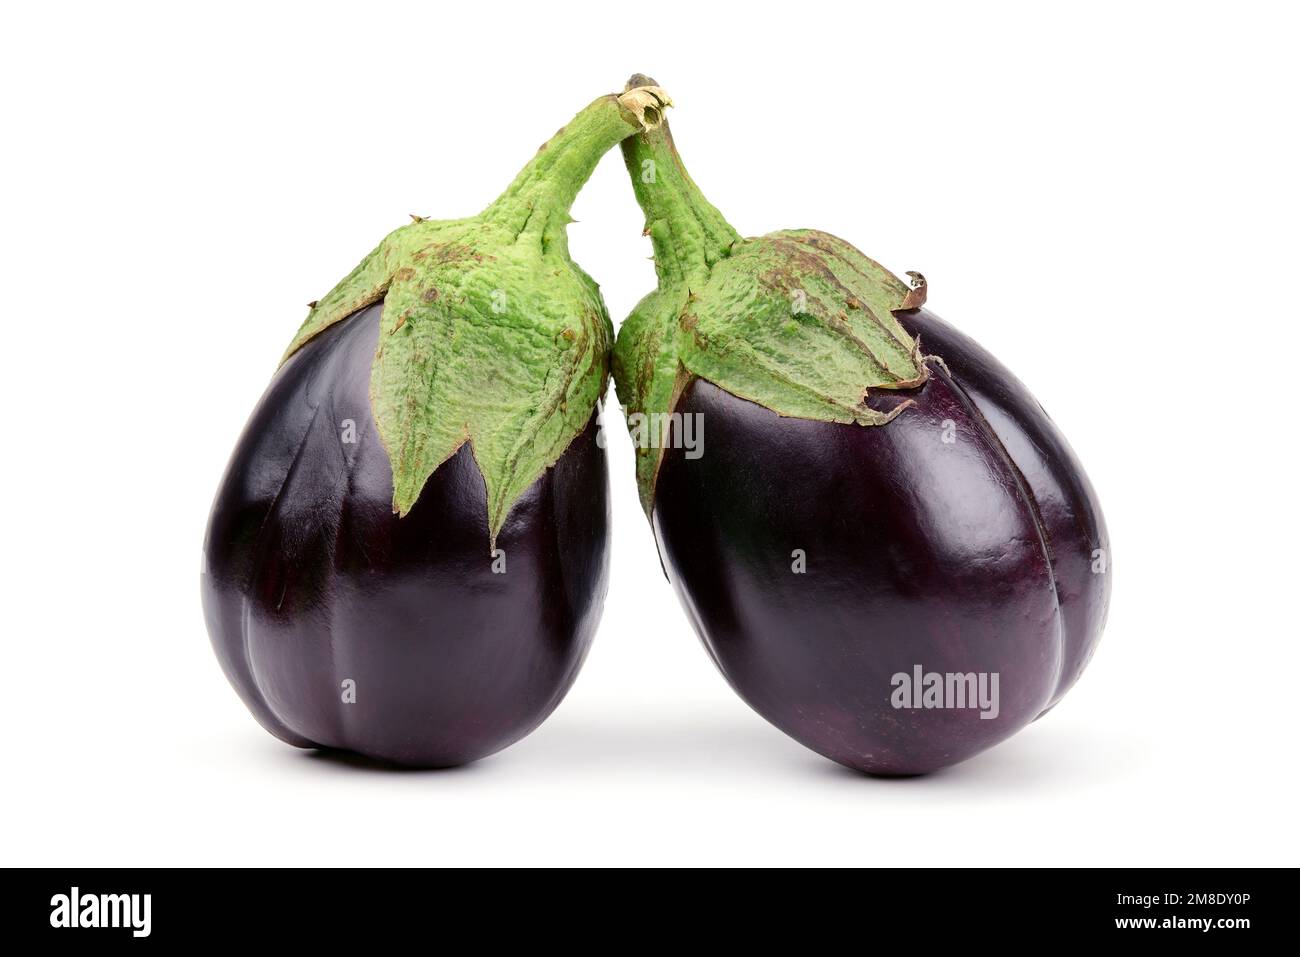 Two aubergine isolated on a white background. Stock Photo